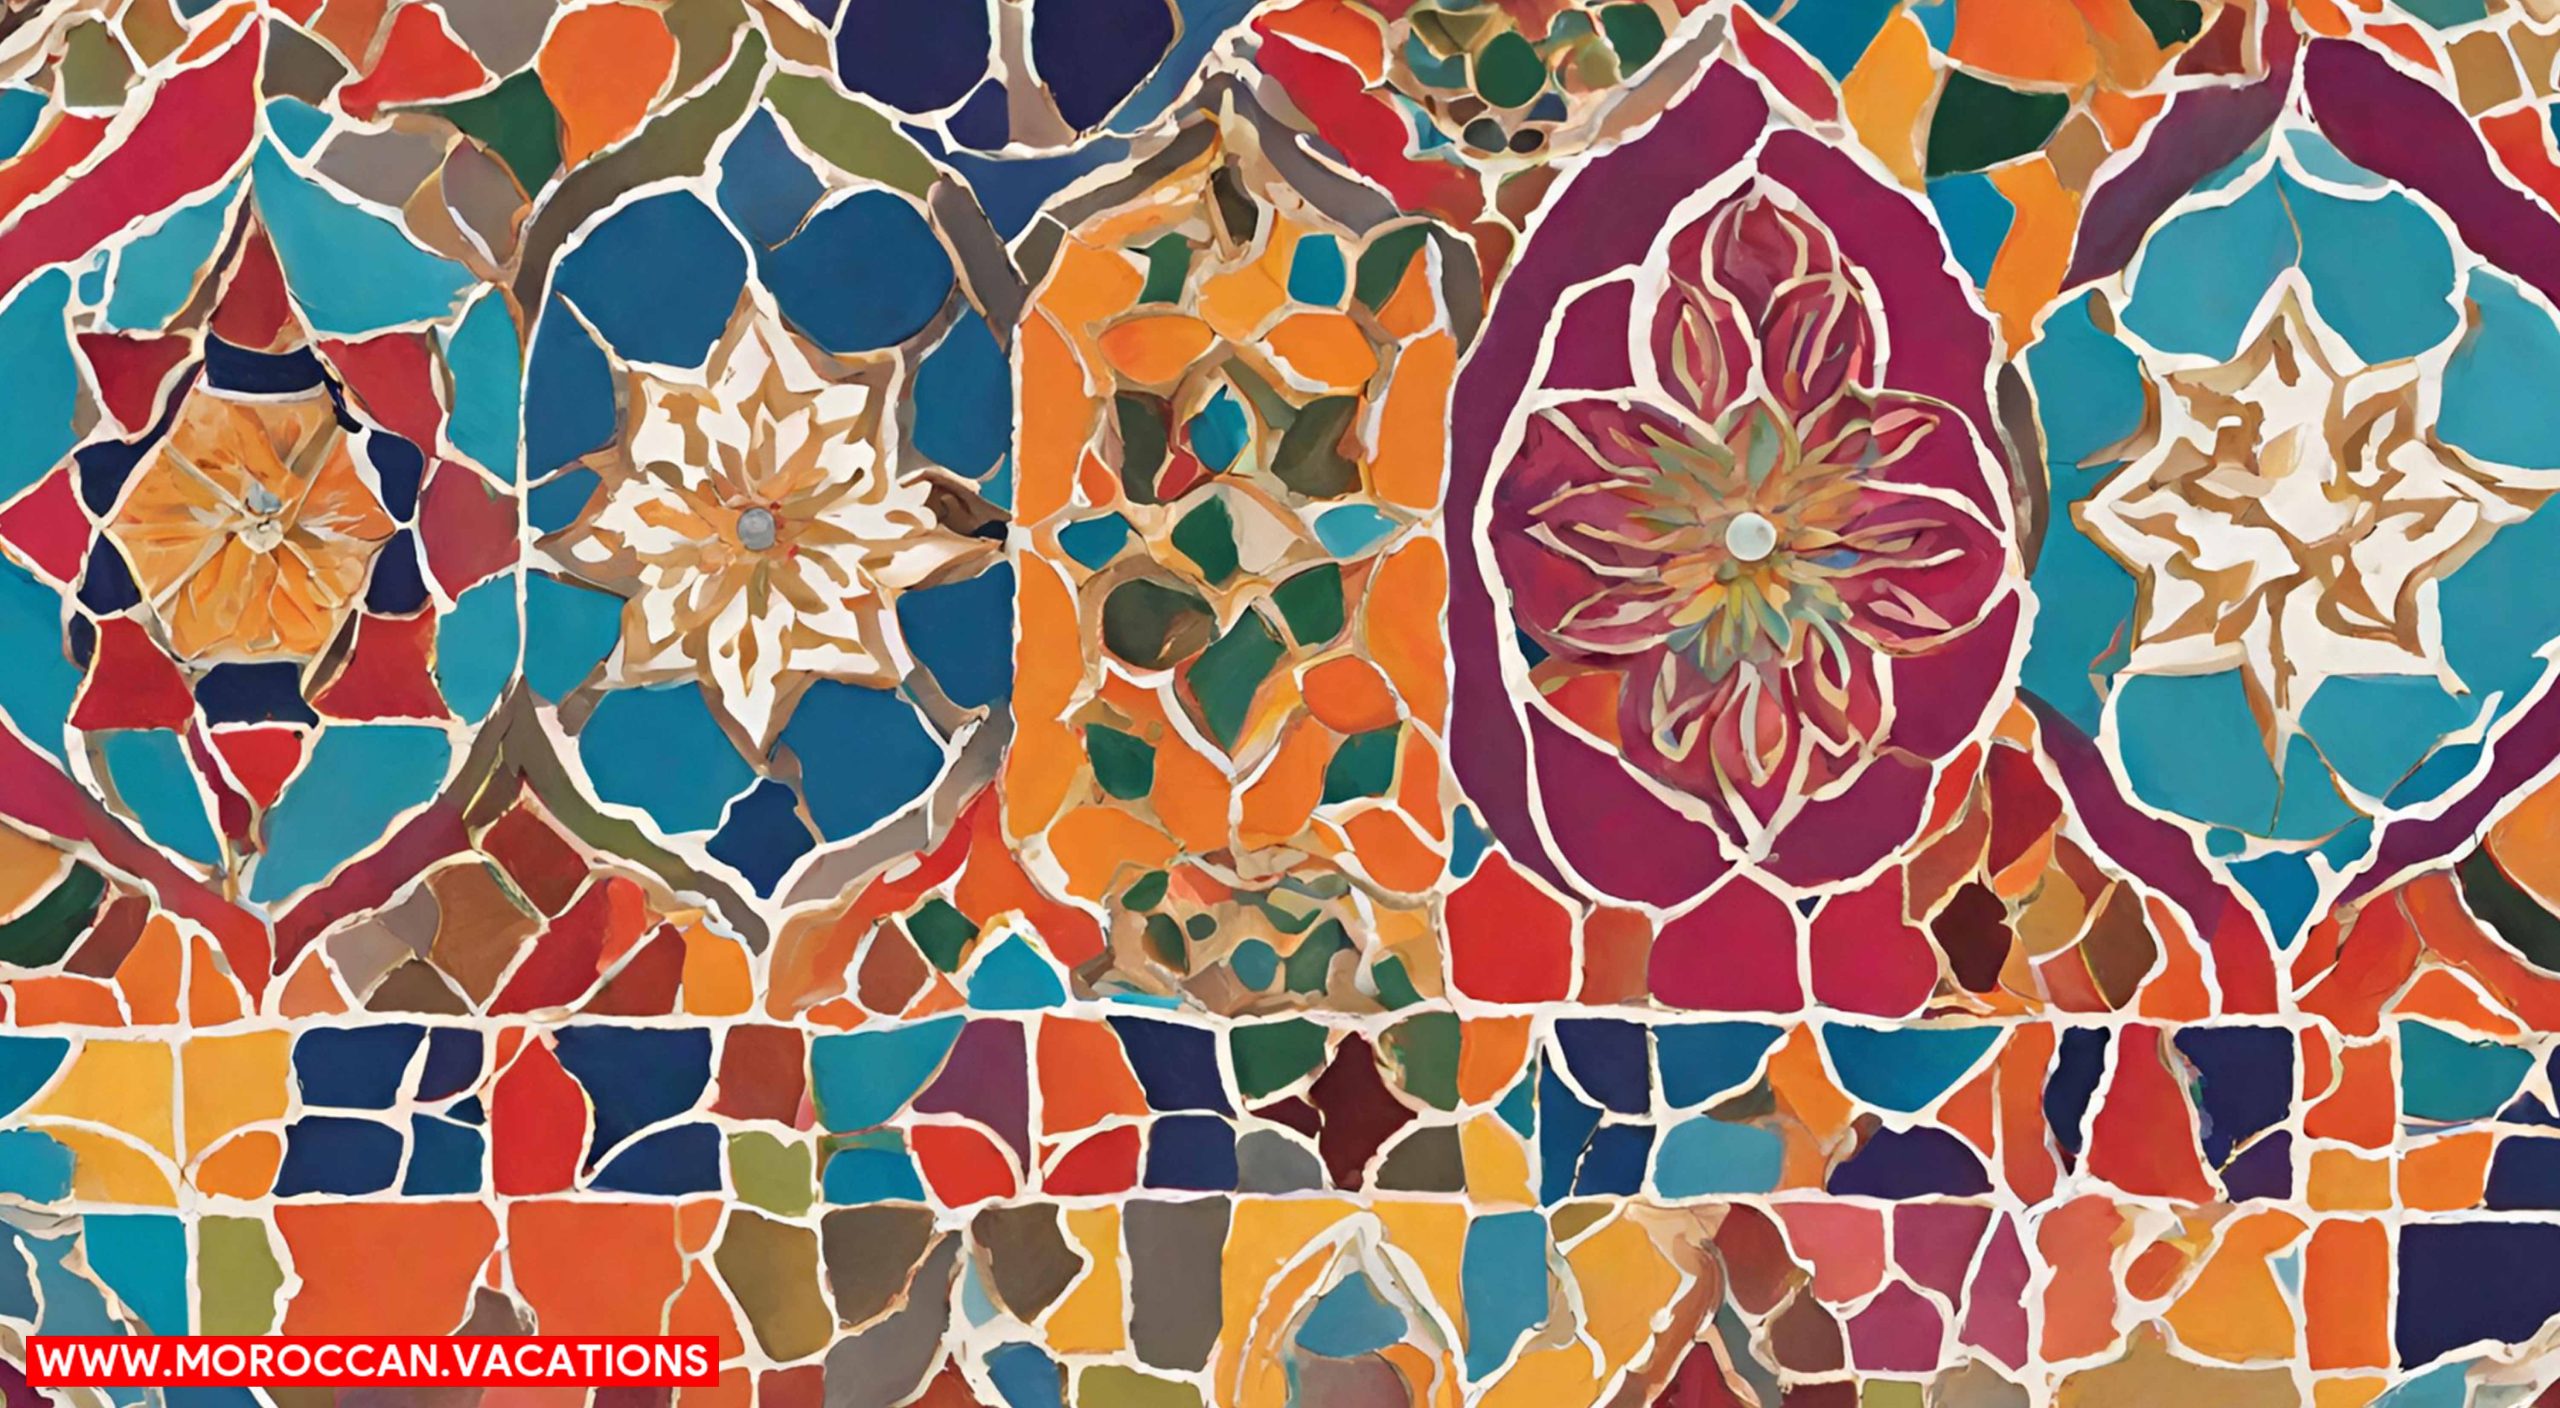 The vibrant essence of Moroccan artistry on an international stage.